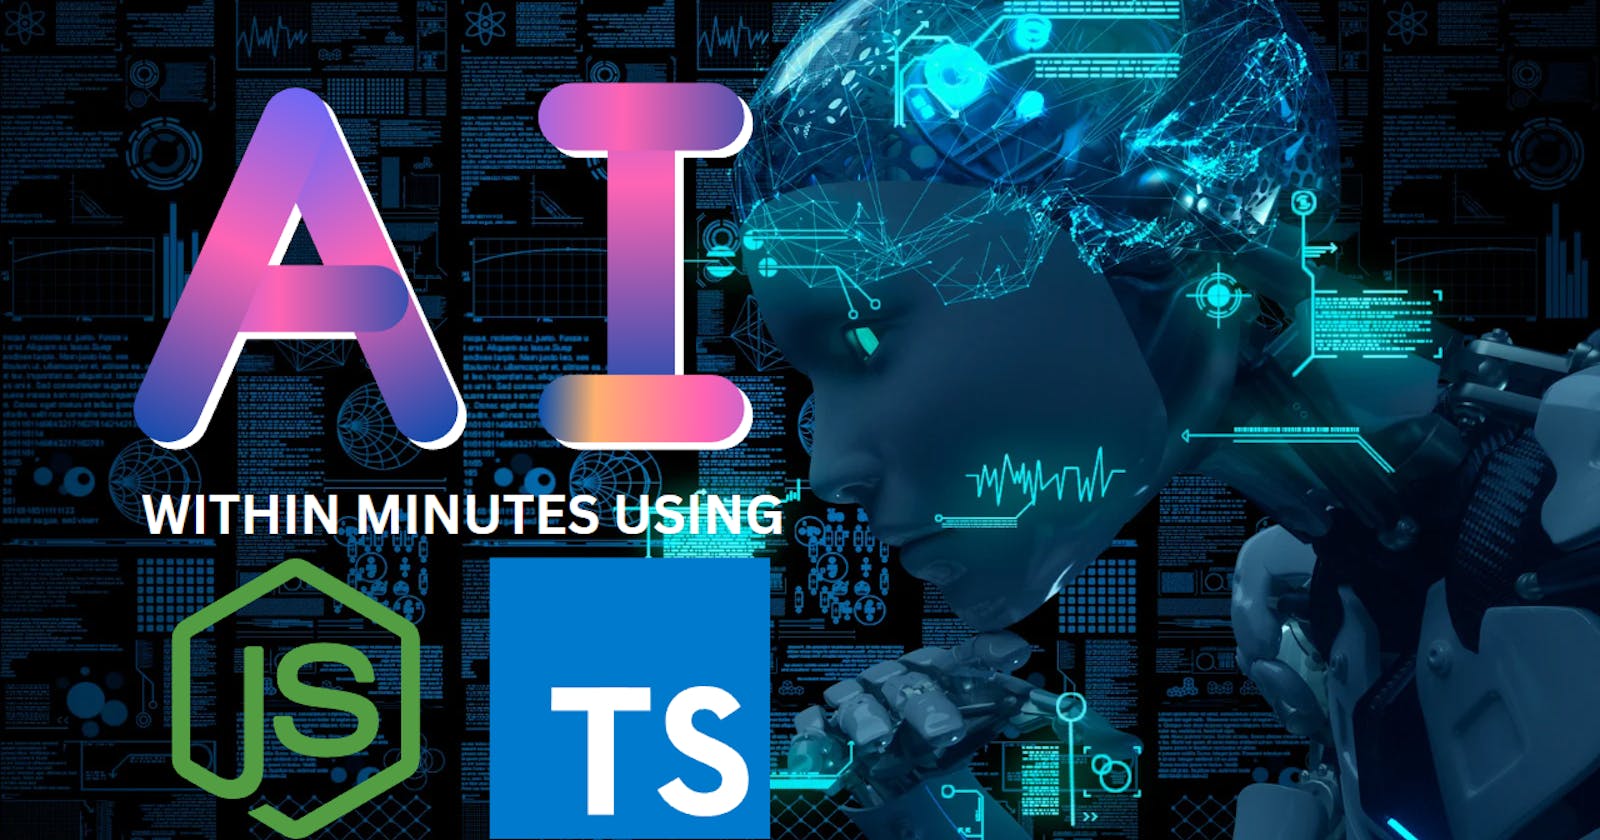 Use over 140+ amazing ChatGPT prompts in 10 minutes 🚀